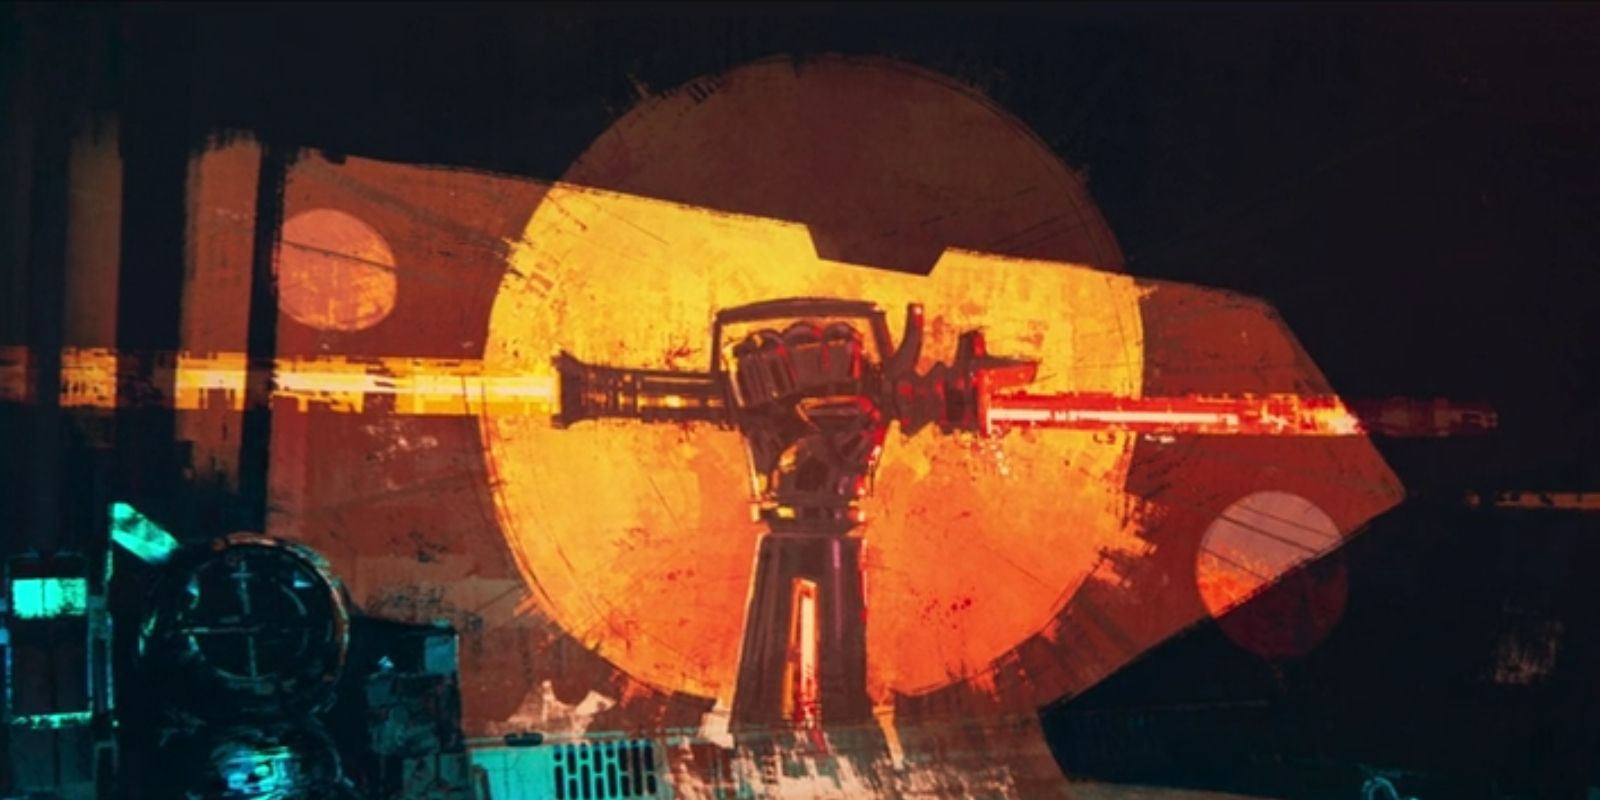 Lola's mural shows her hand holding her dual bladed lightsaber with a red and yellow blade in Star Wars Visions